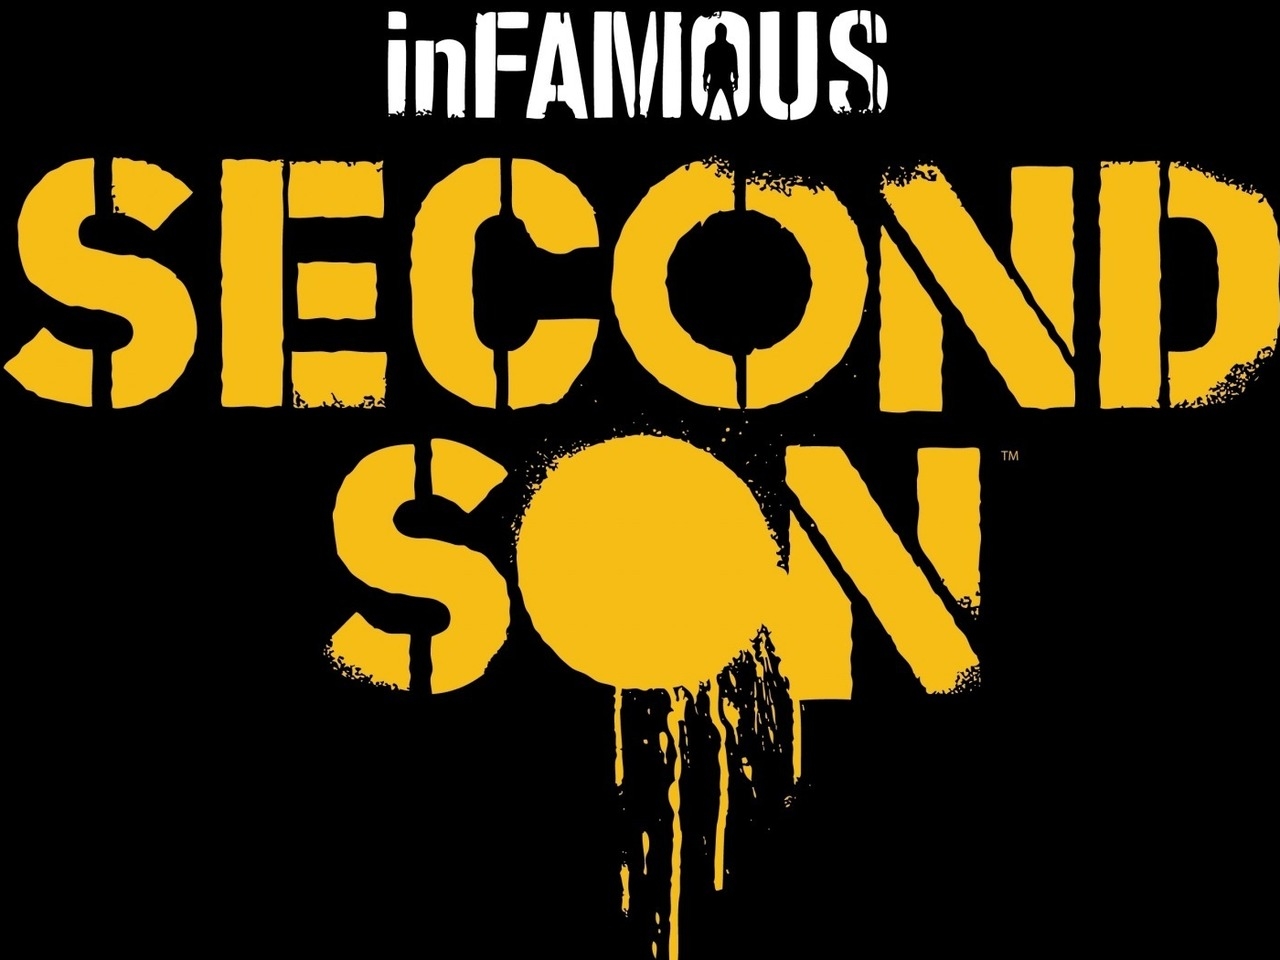 inFamous Second Son for 1280 x 960 resolution